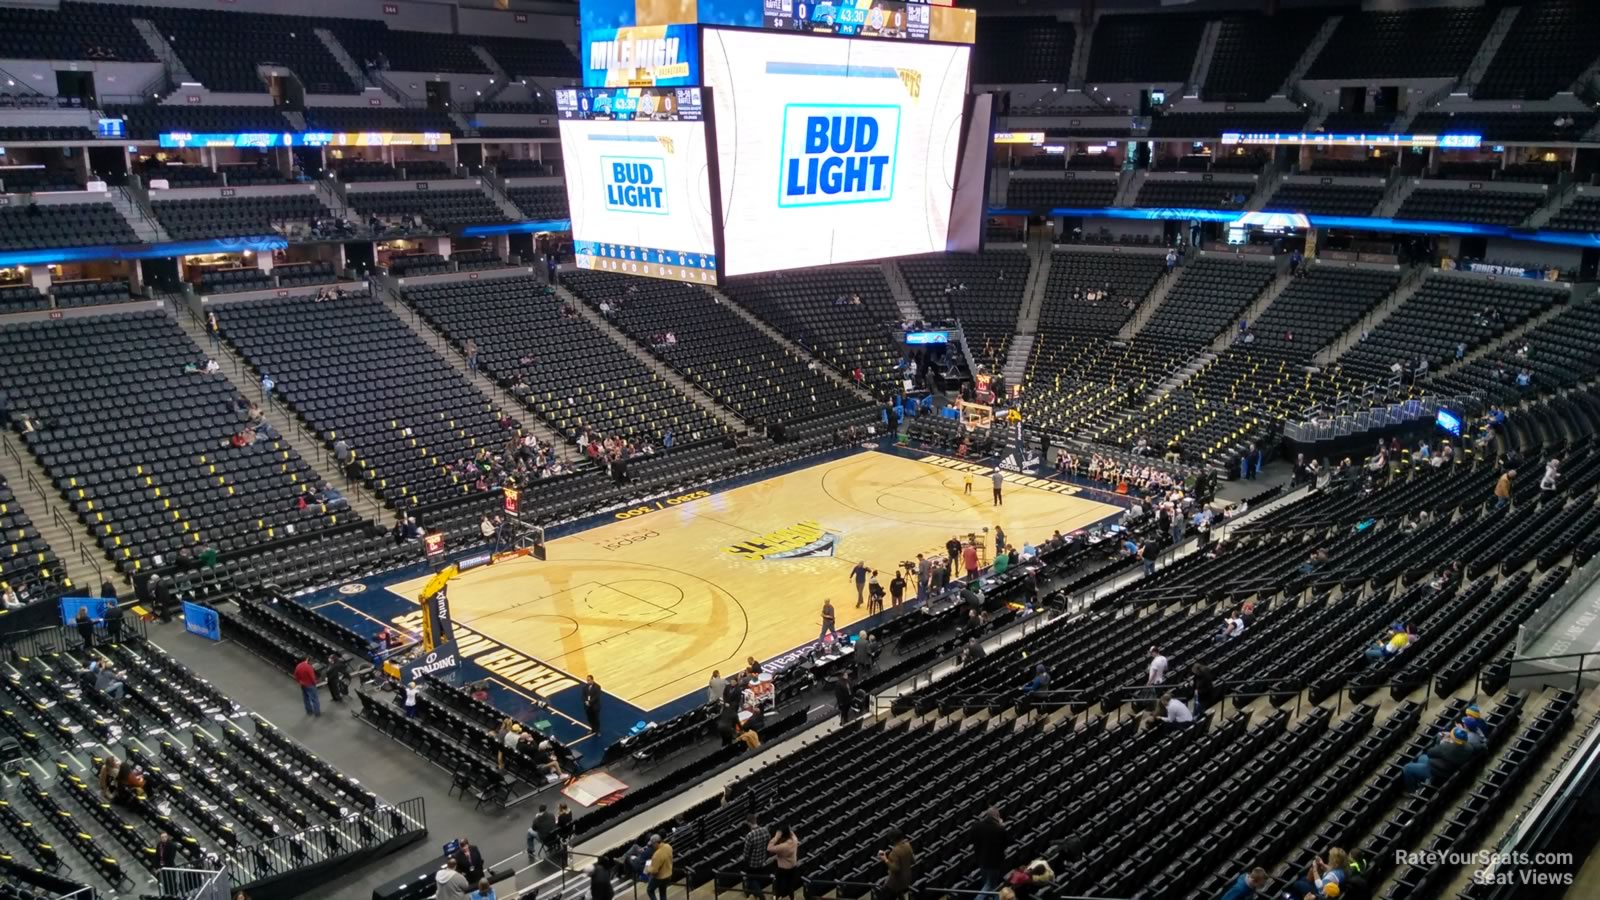 section 311, row 1 seat view  for basketball - ball arena